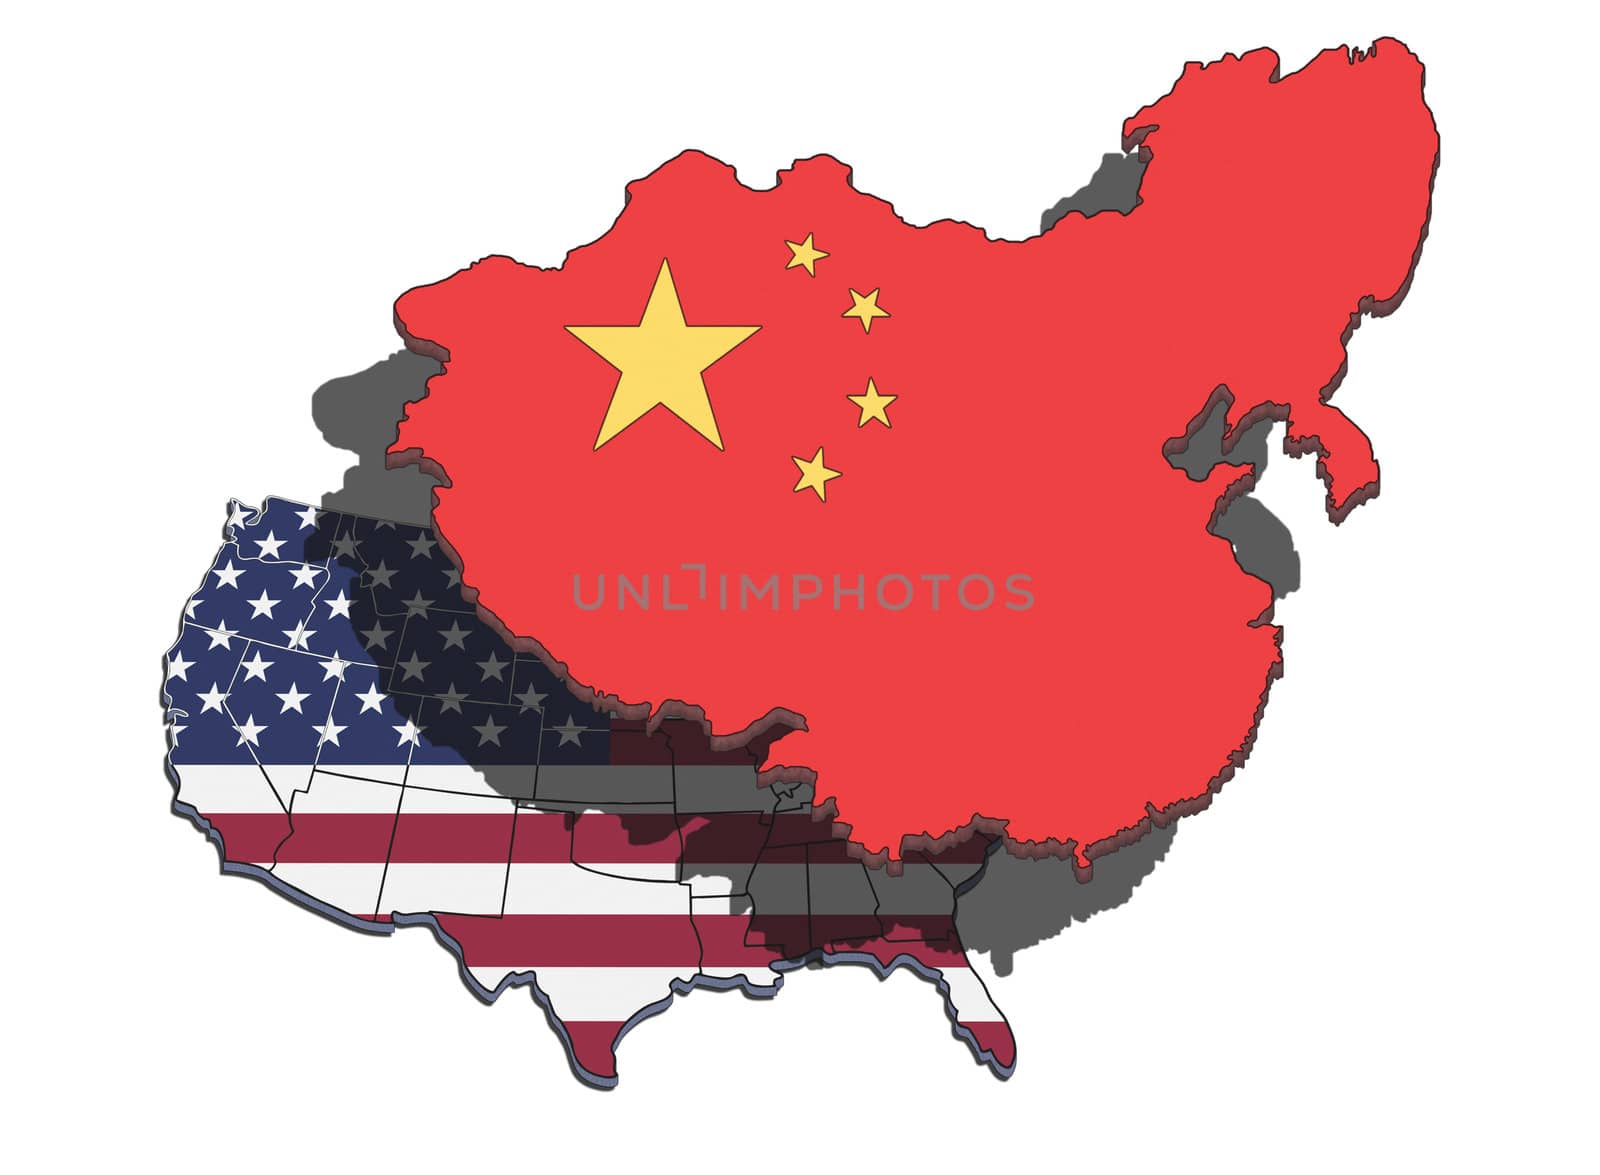 China dominating and overshadowing the USA.